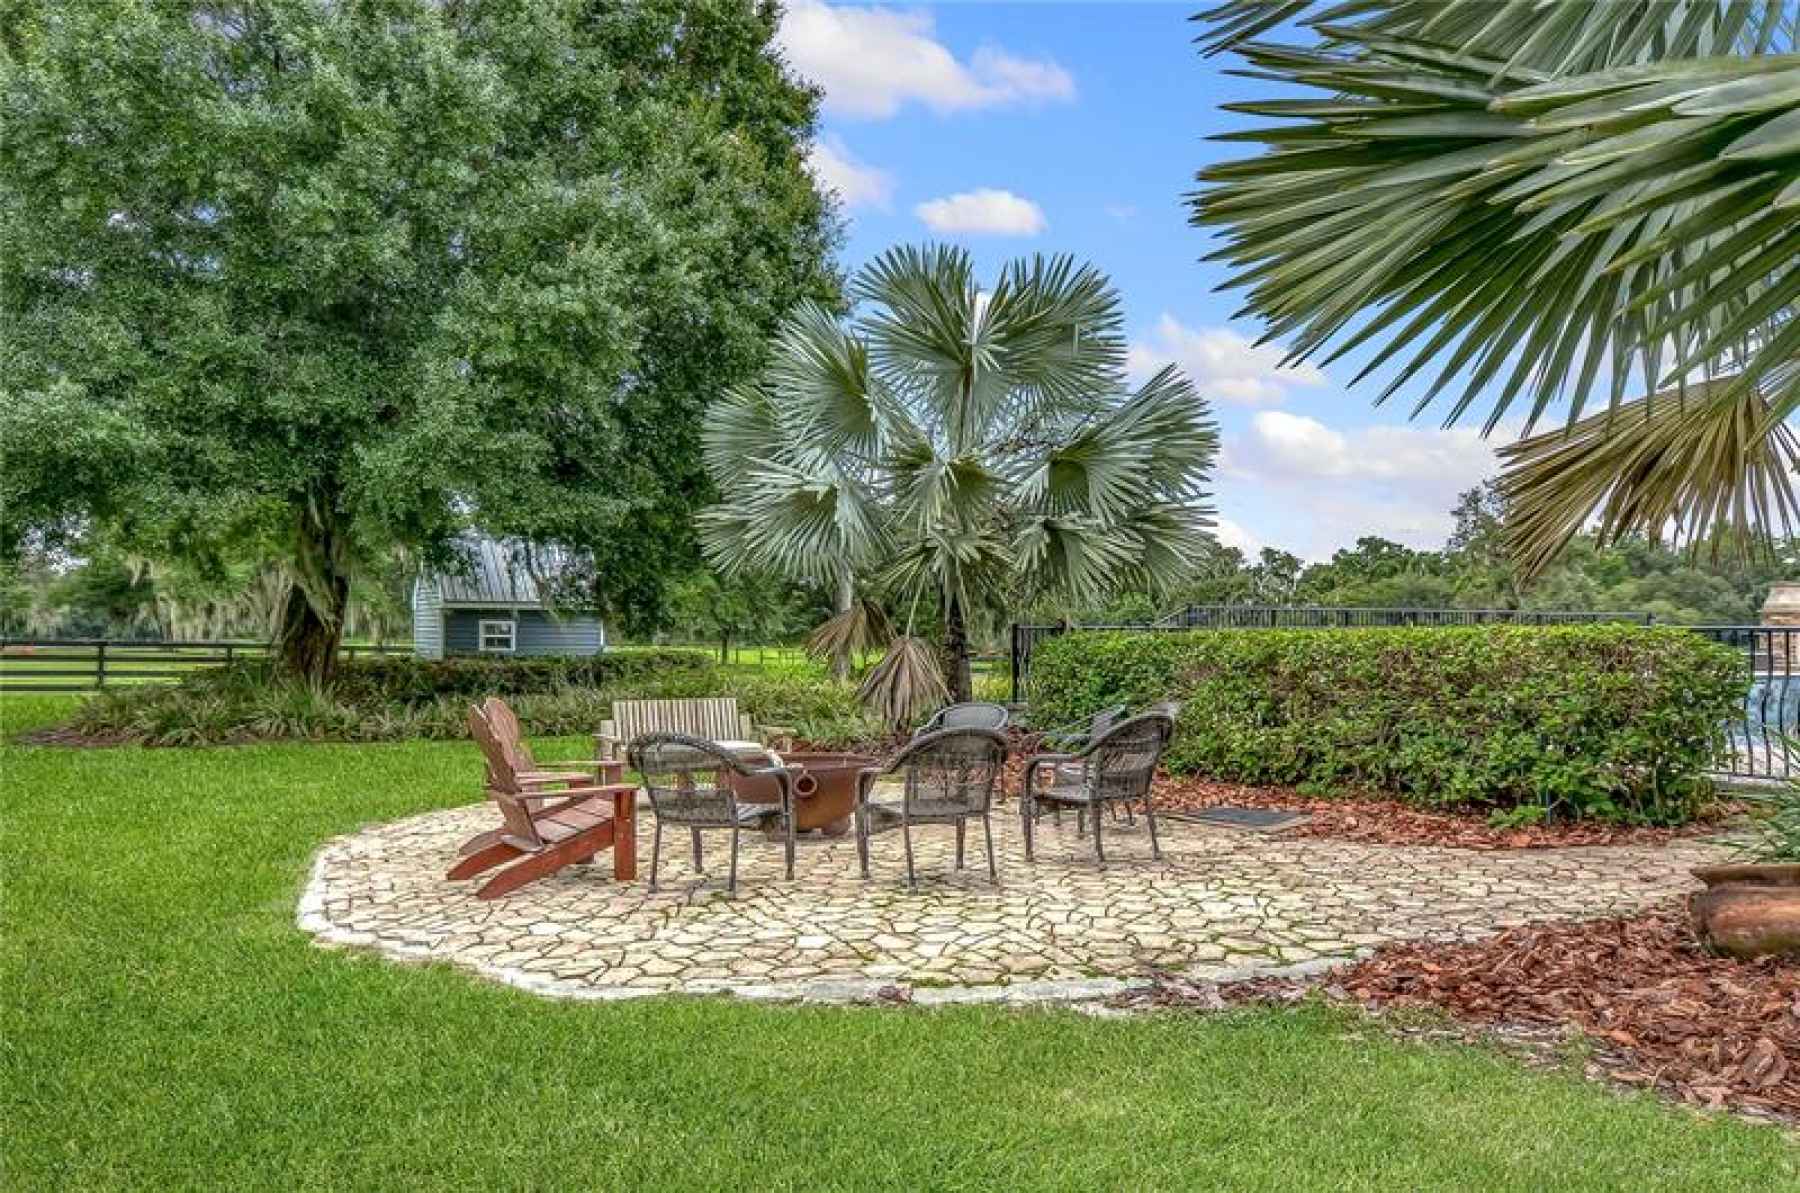 This area is perfect for making s'mores with the family!